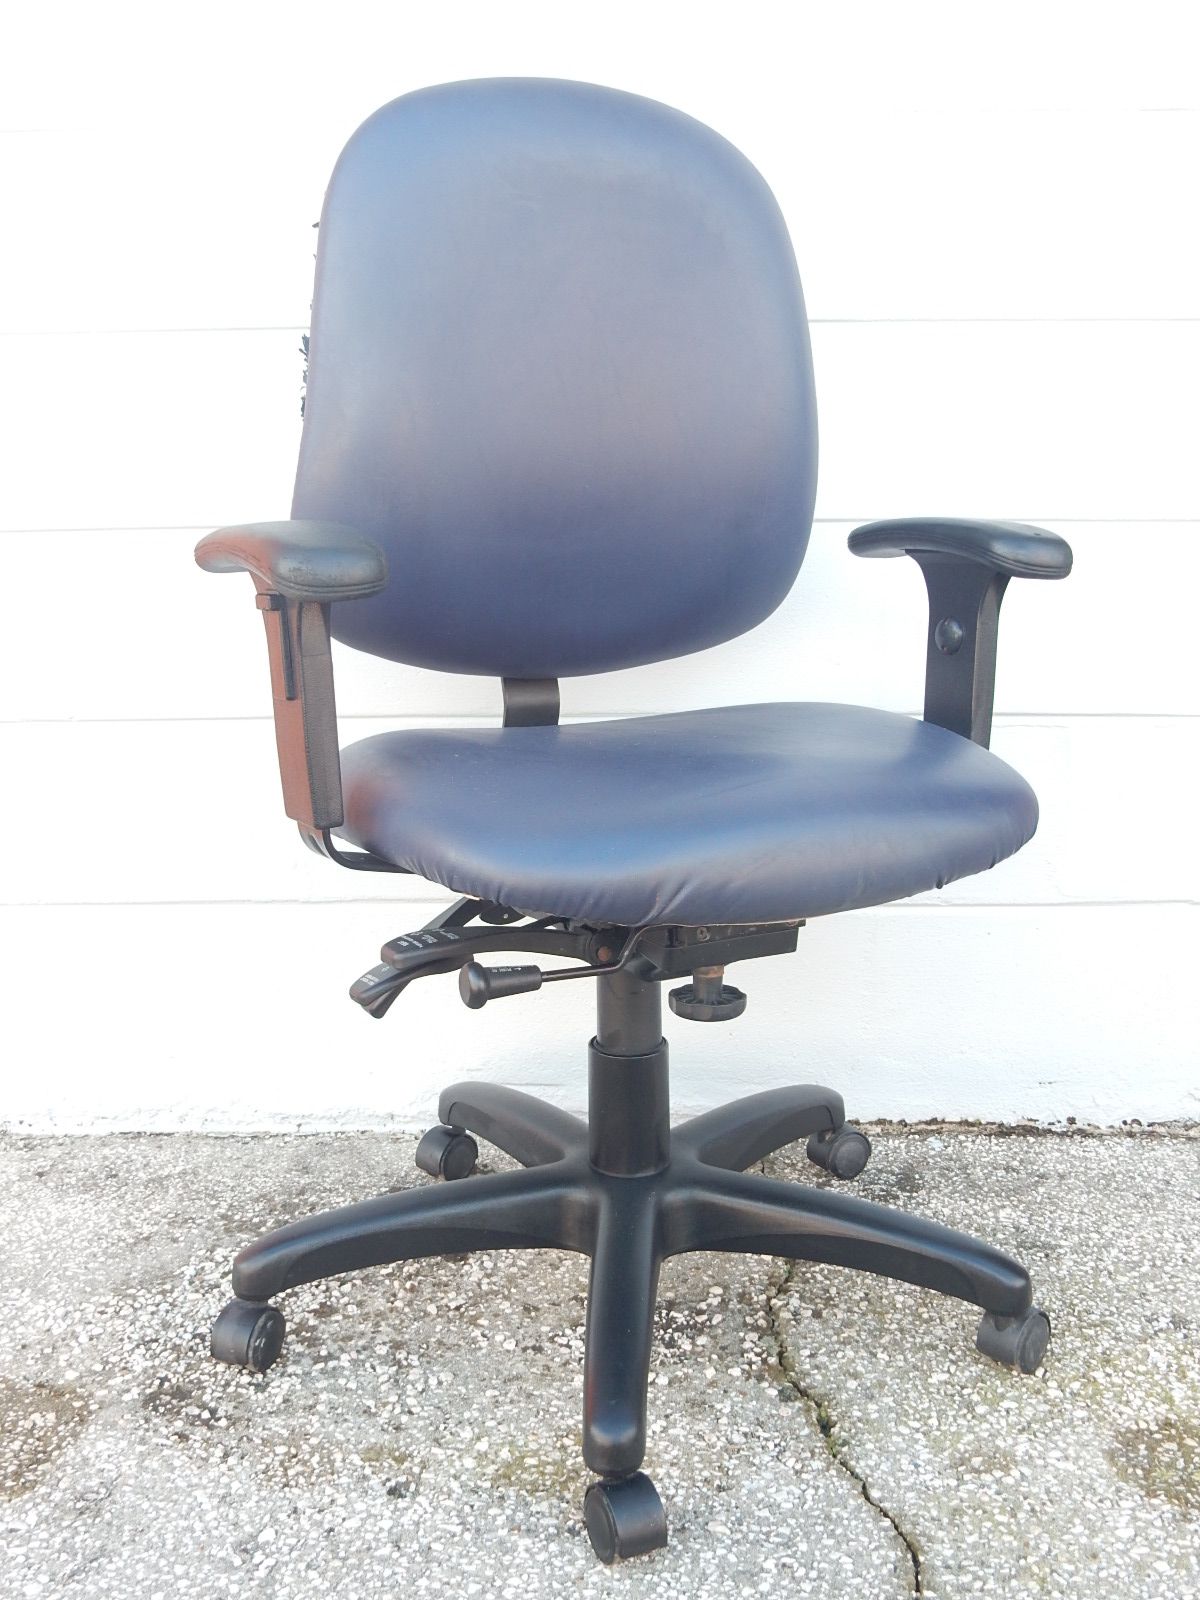 Blue high back office chair with several adjustments